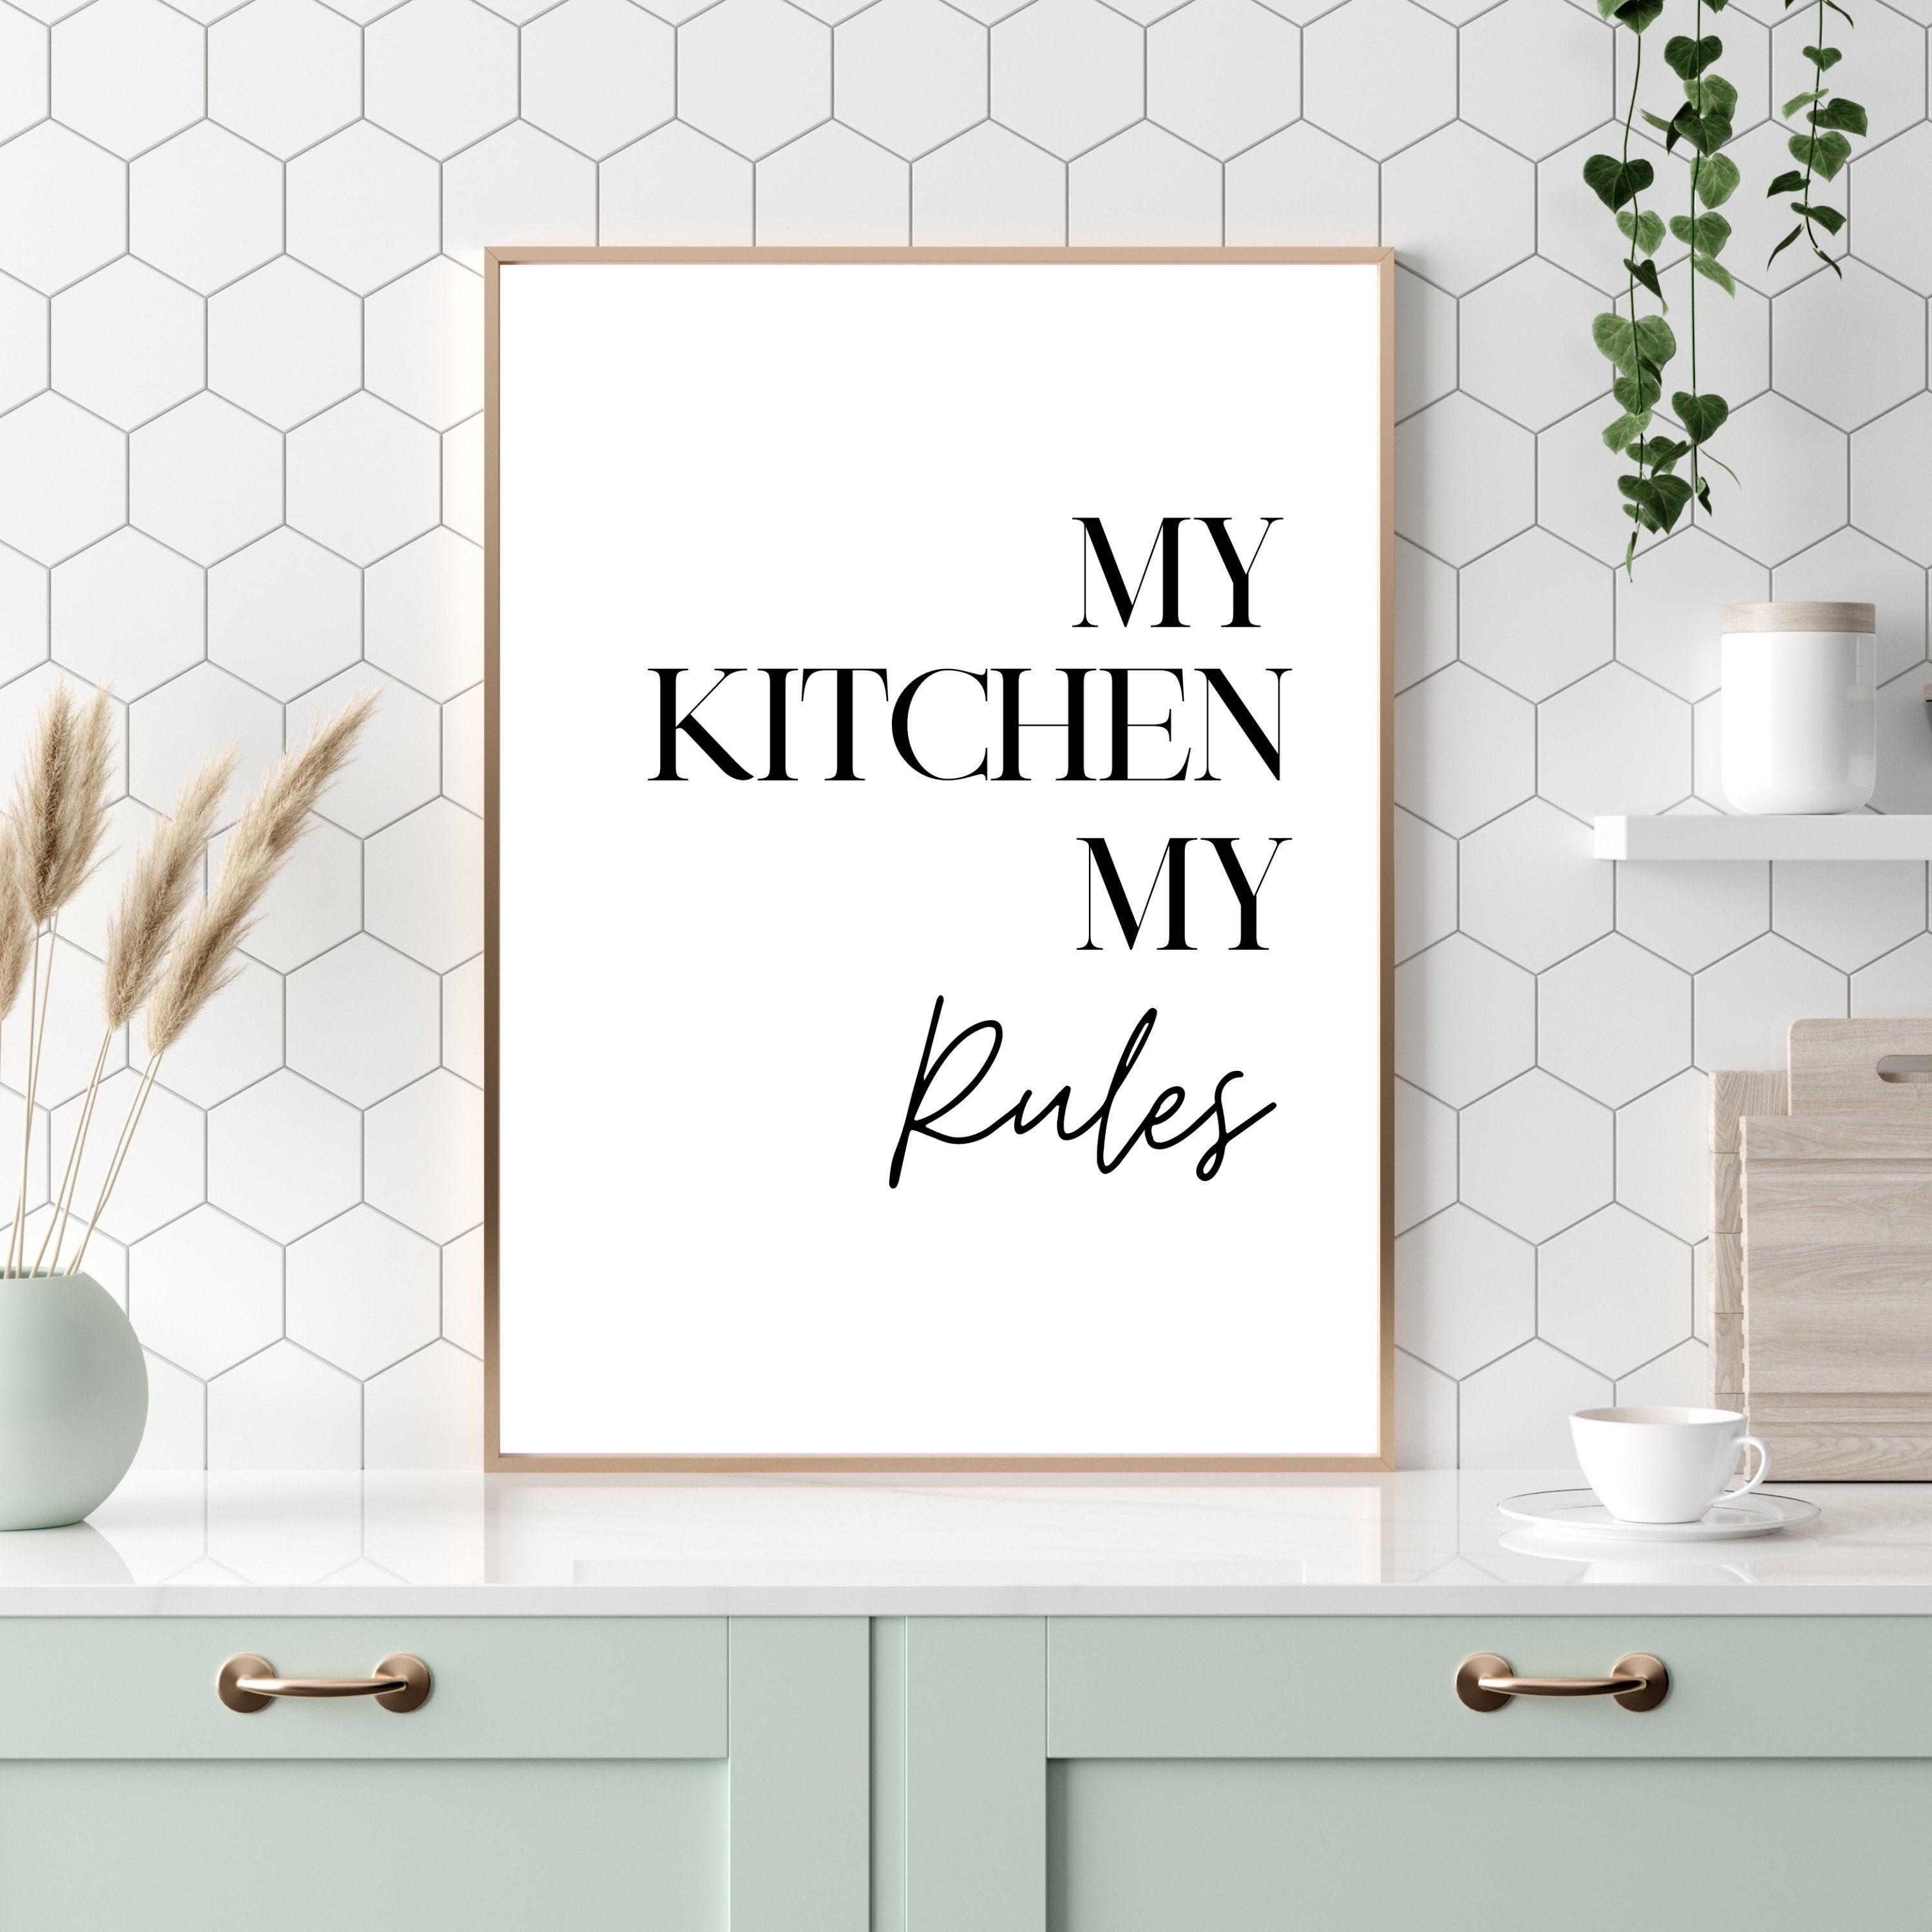 4 PCS Unframed Print, Kitchen Wall Decor, Funny Kitchen Wall Art, Humor  Quote for Kitchen Decor, My Kitchen My Rule, Home Deocr